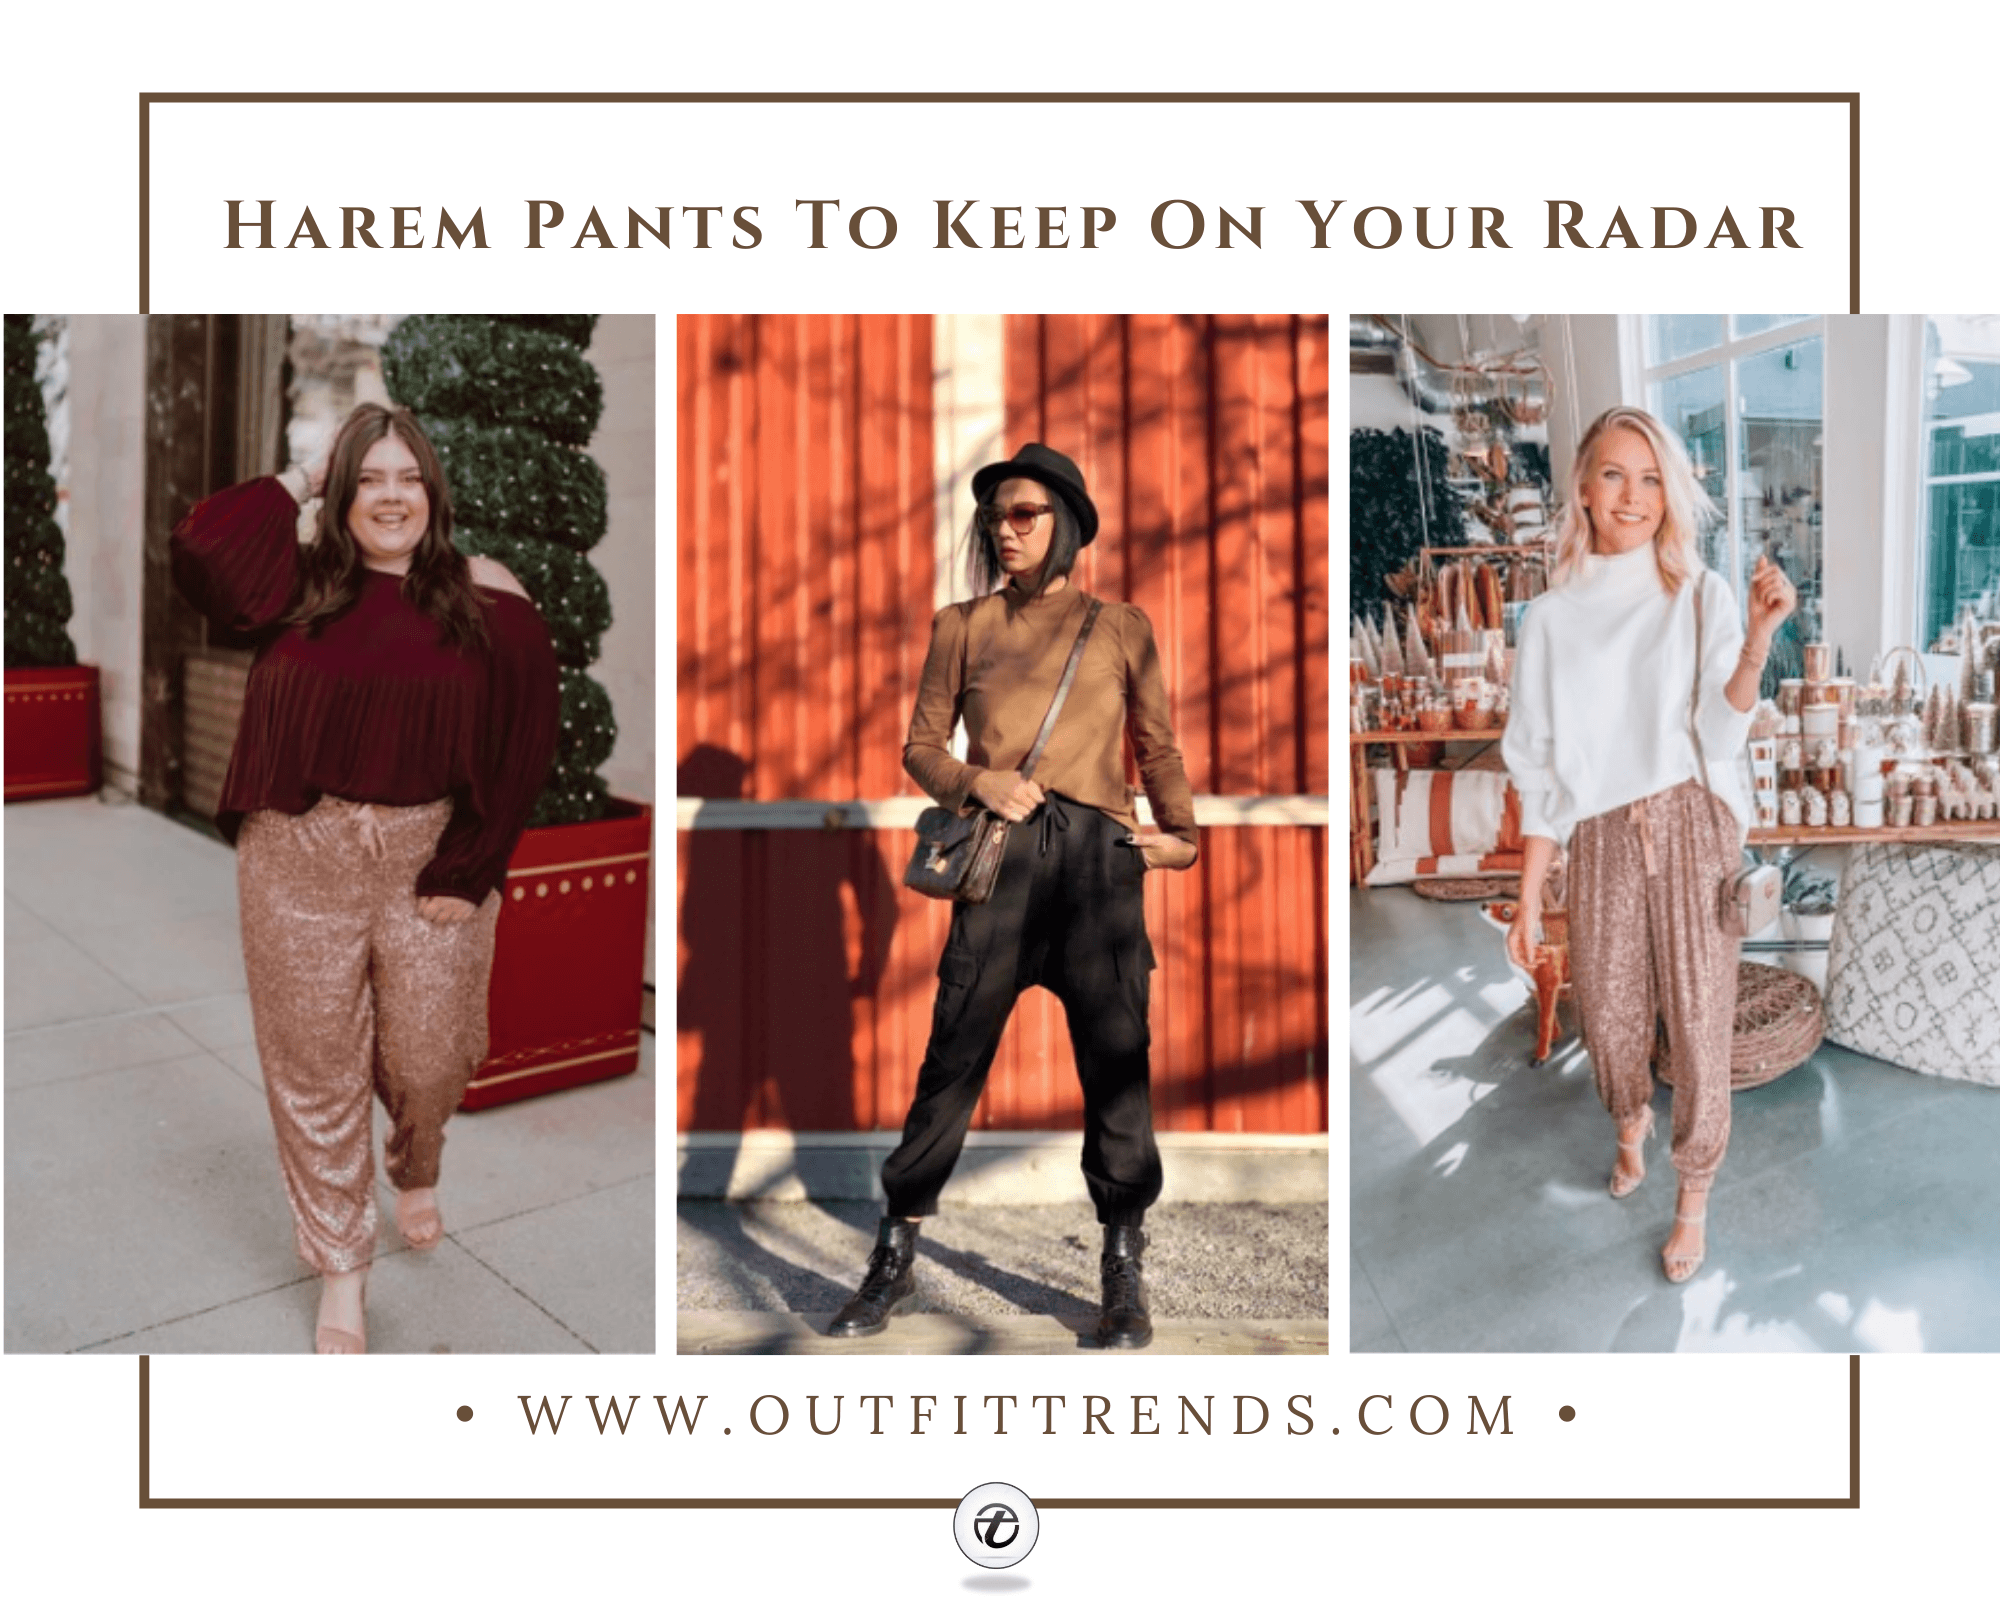 What kind of tops go with harem pants ? – Clothes By Locker Room